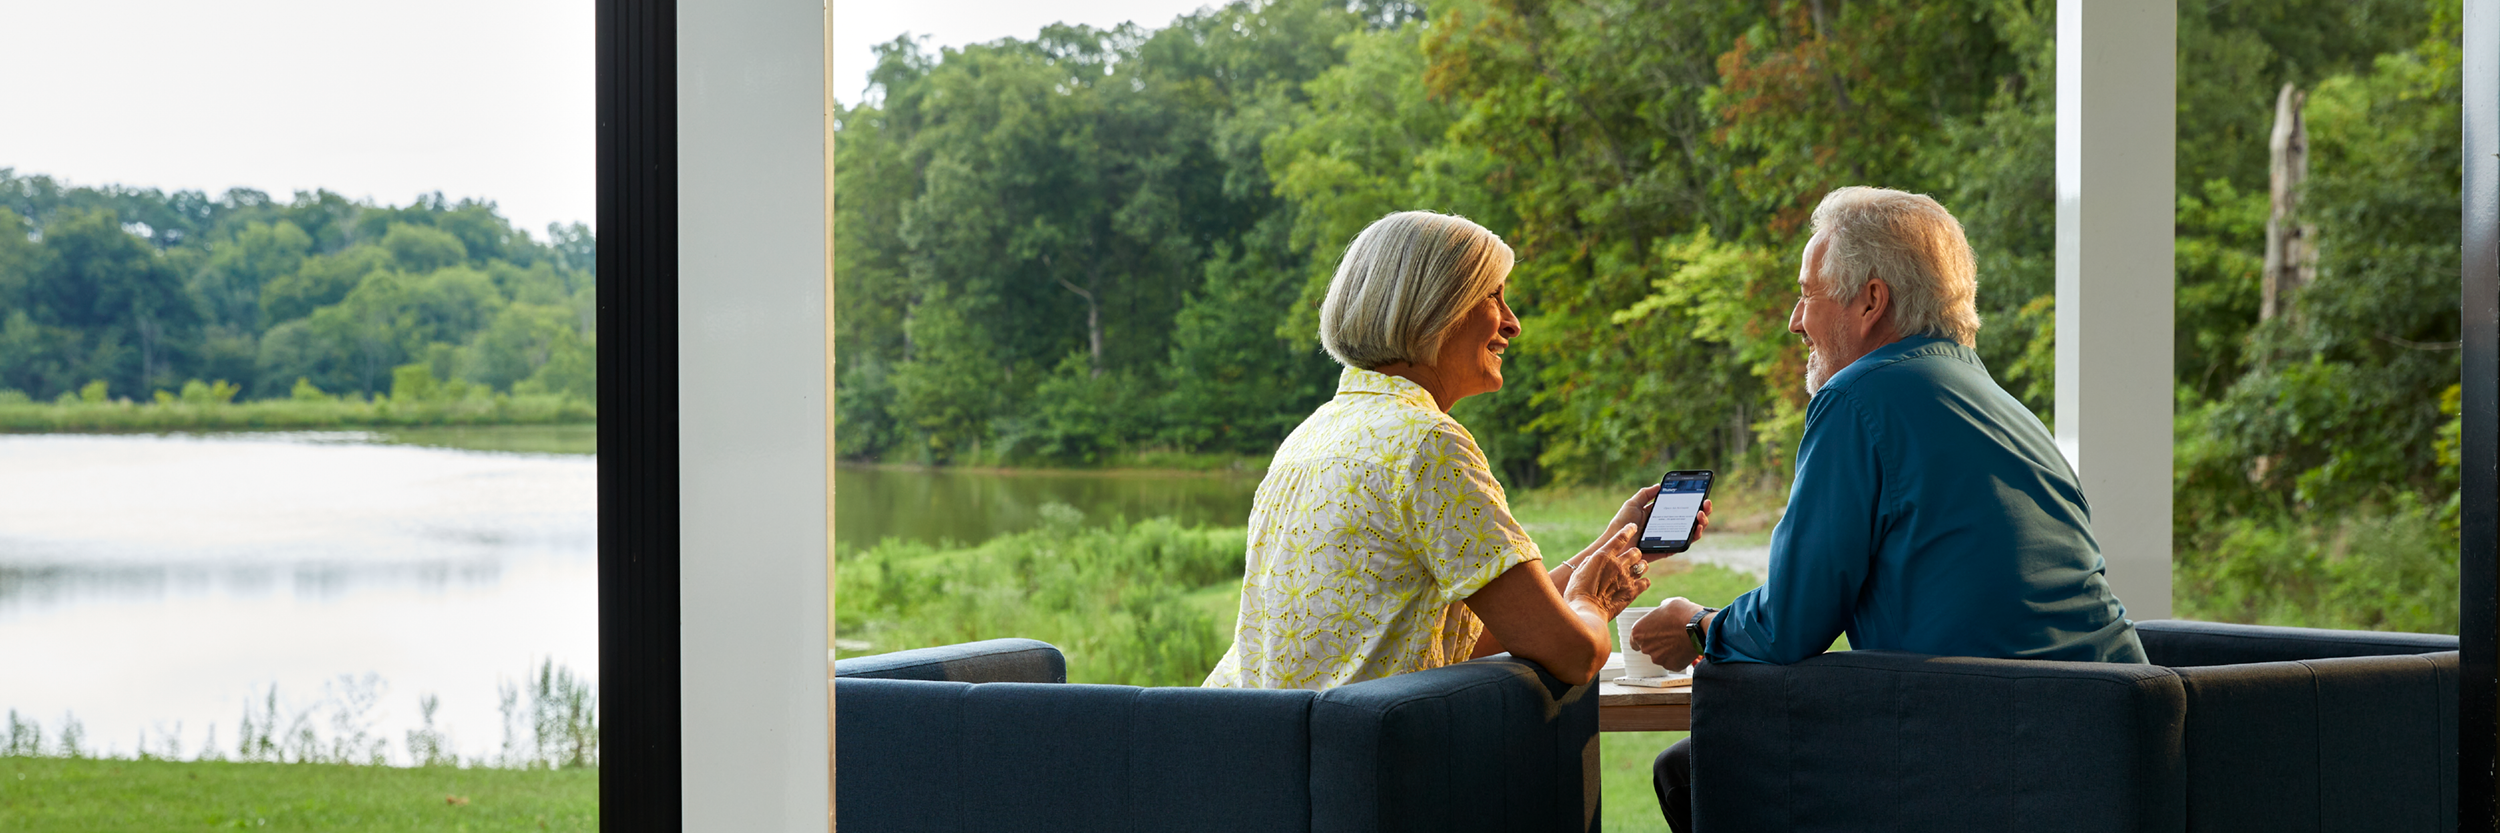 A man and woman sit on a porch with a lake view as they look at a cell phone.